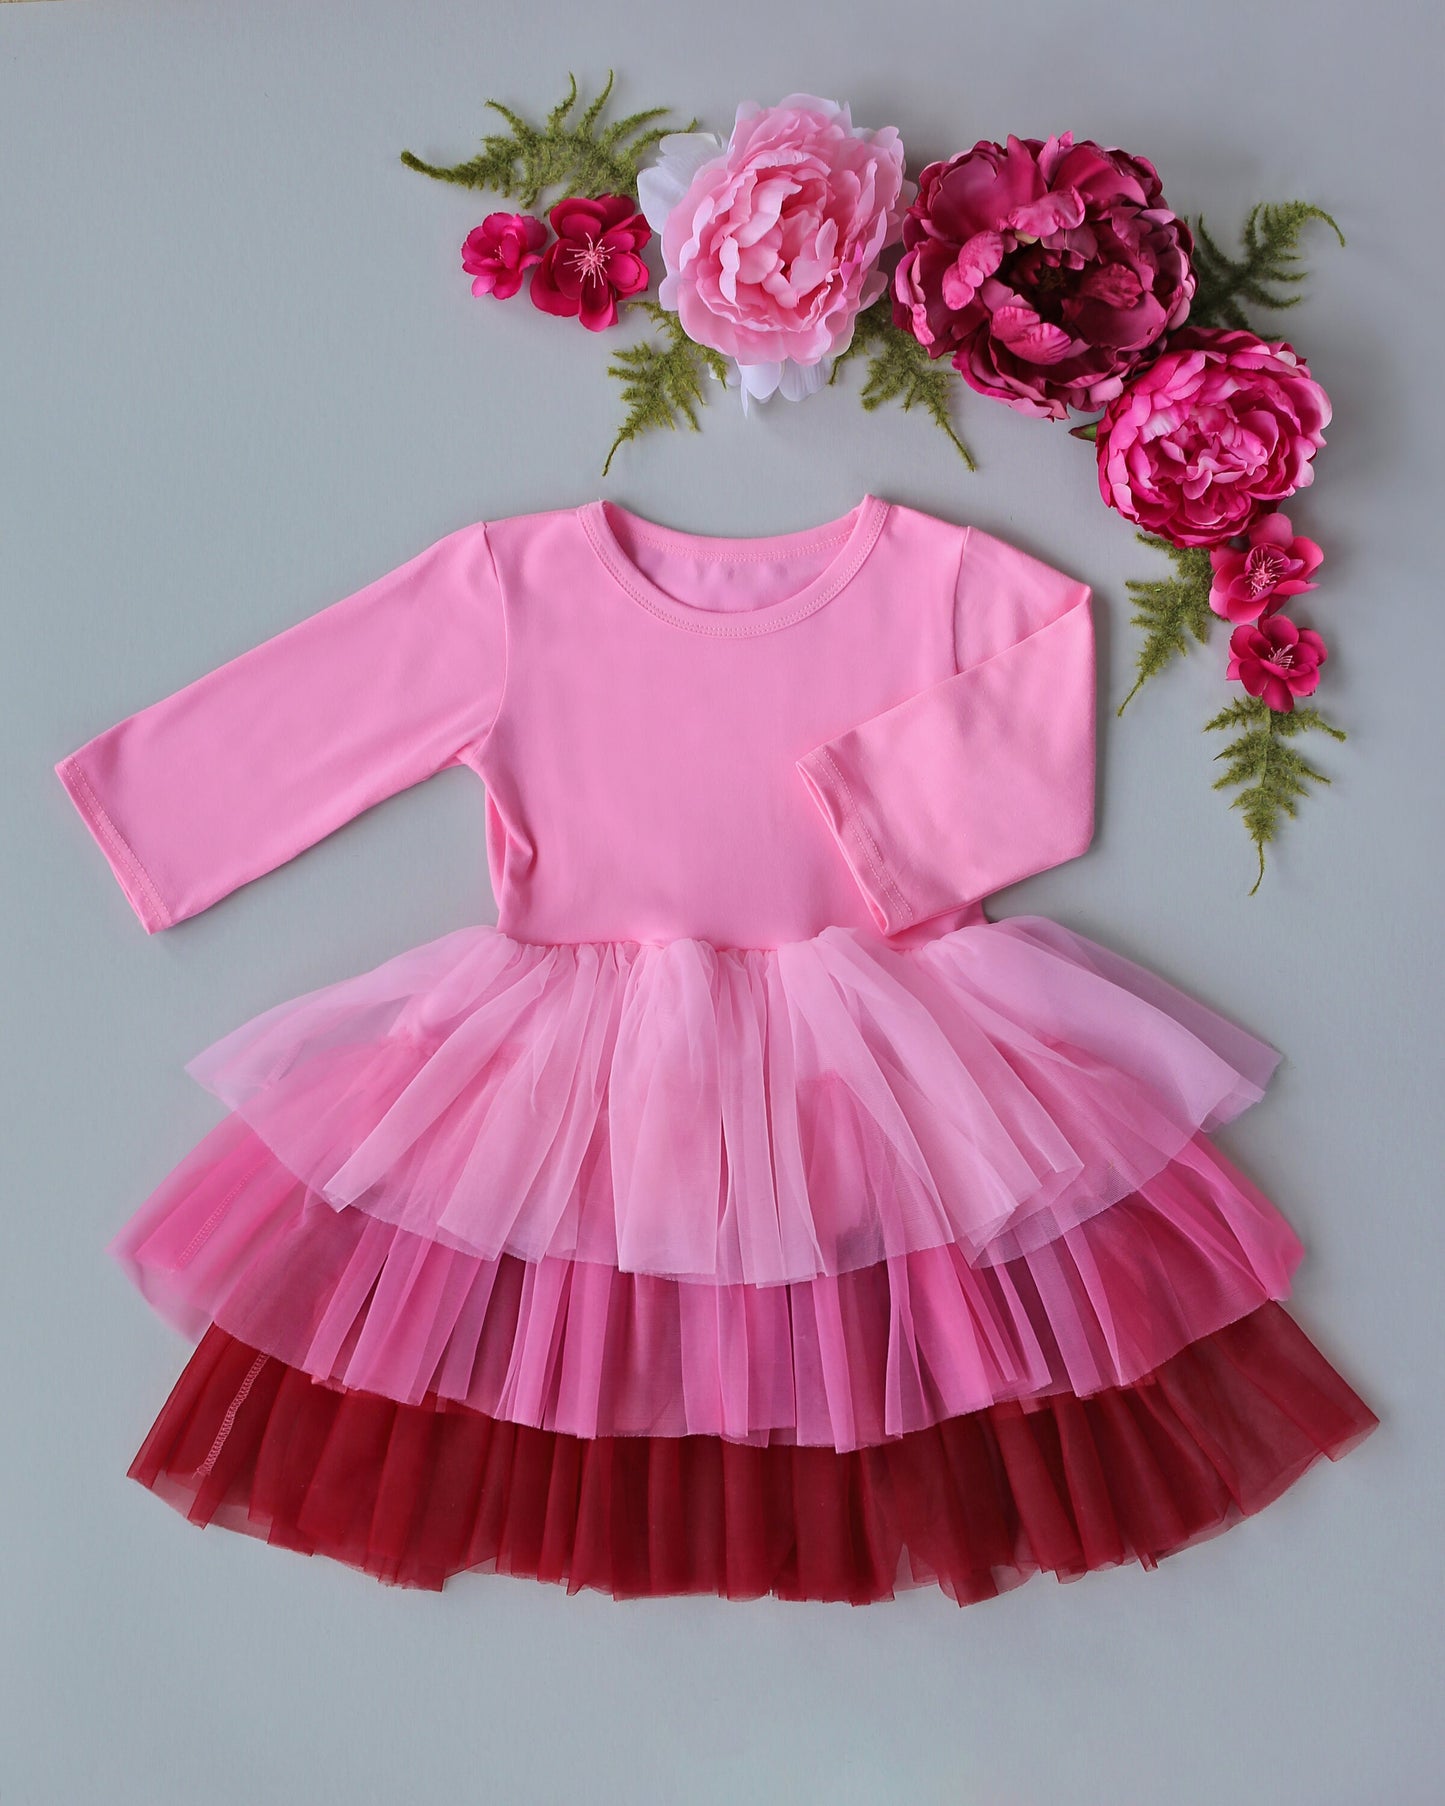 3/4 Sleeve Tutu Dress in Pink and Wine Ombre